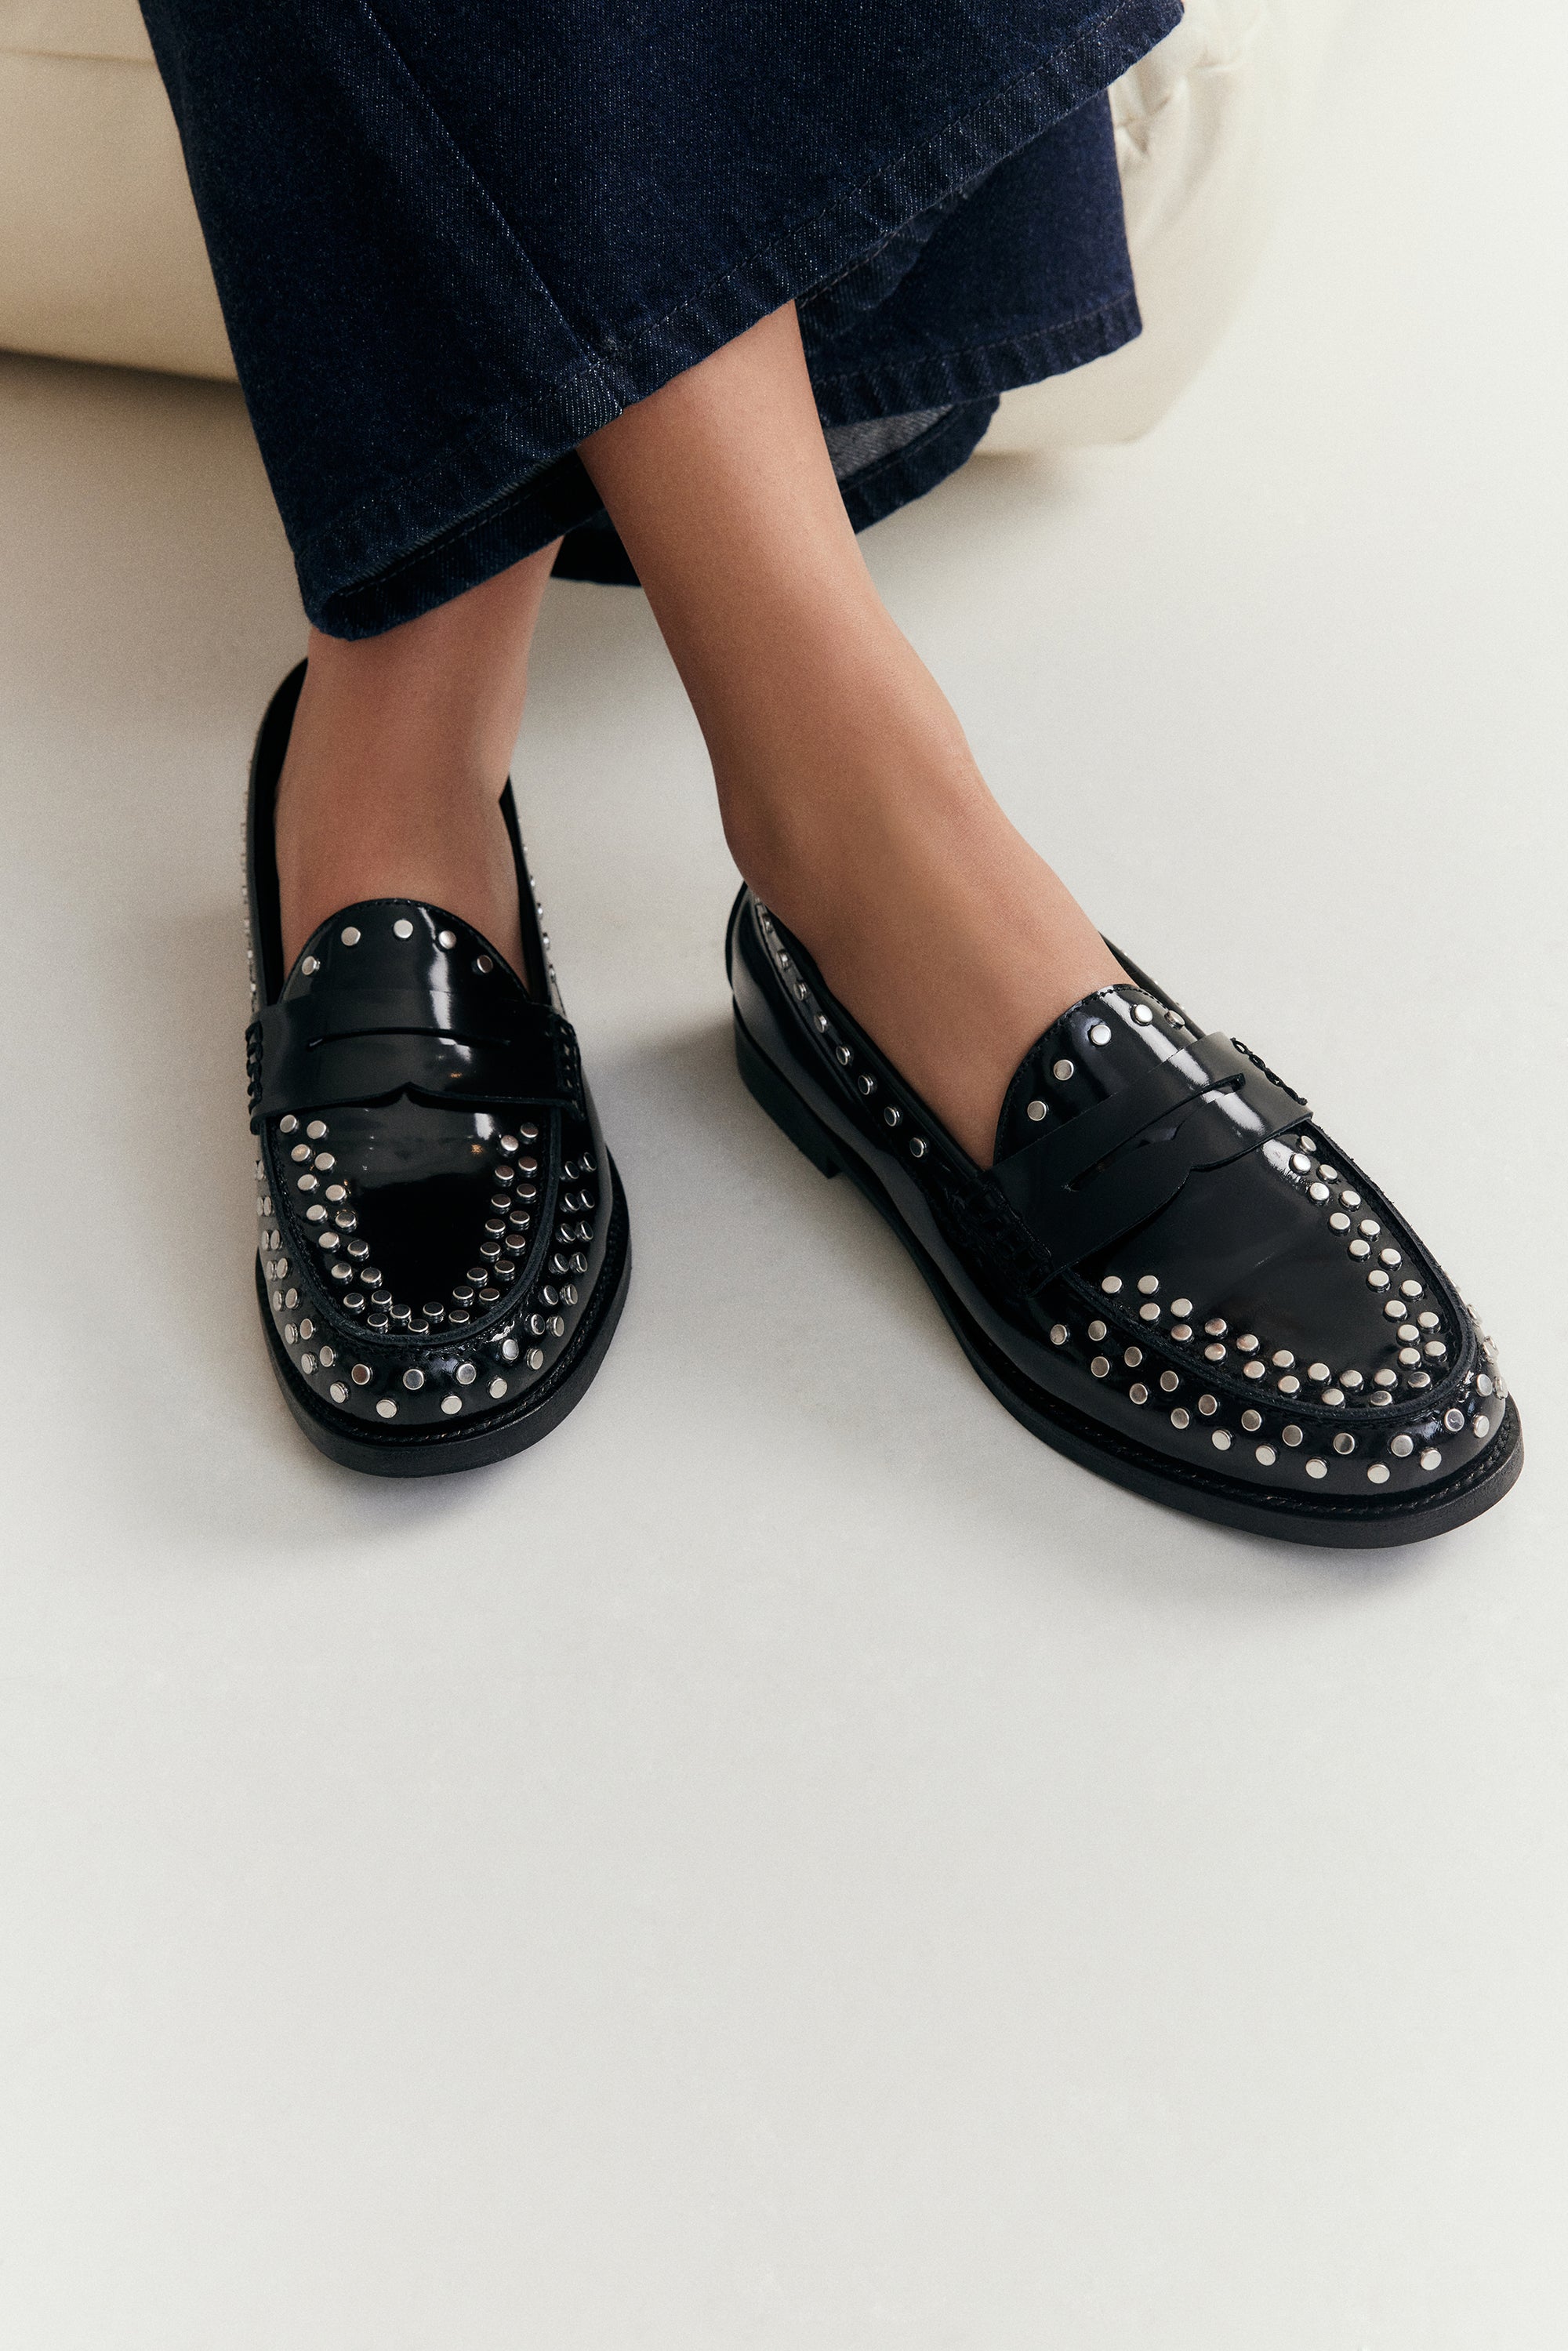 From Work to Weekend: How To Style Loafers